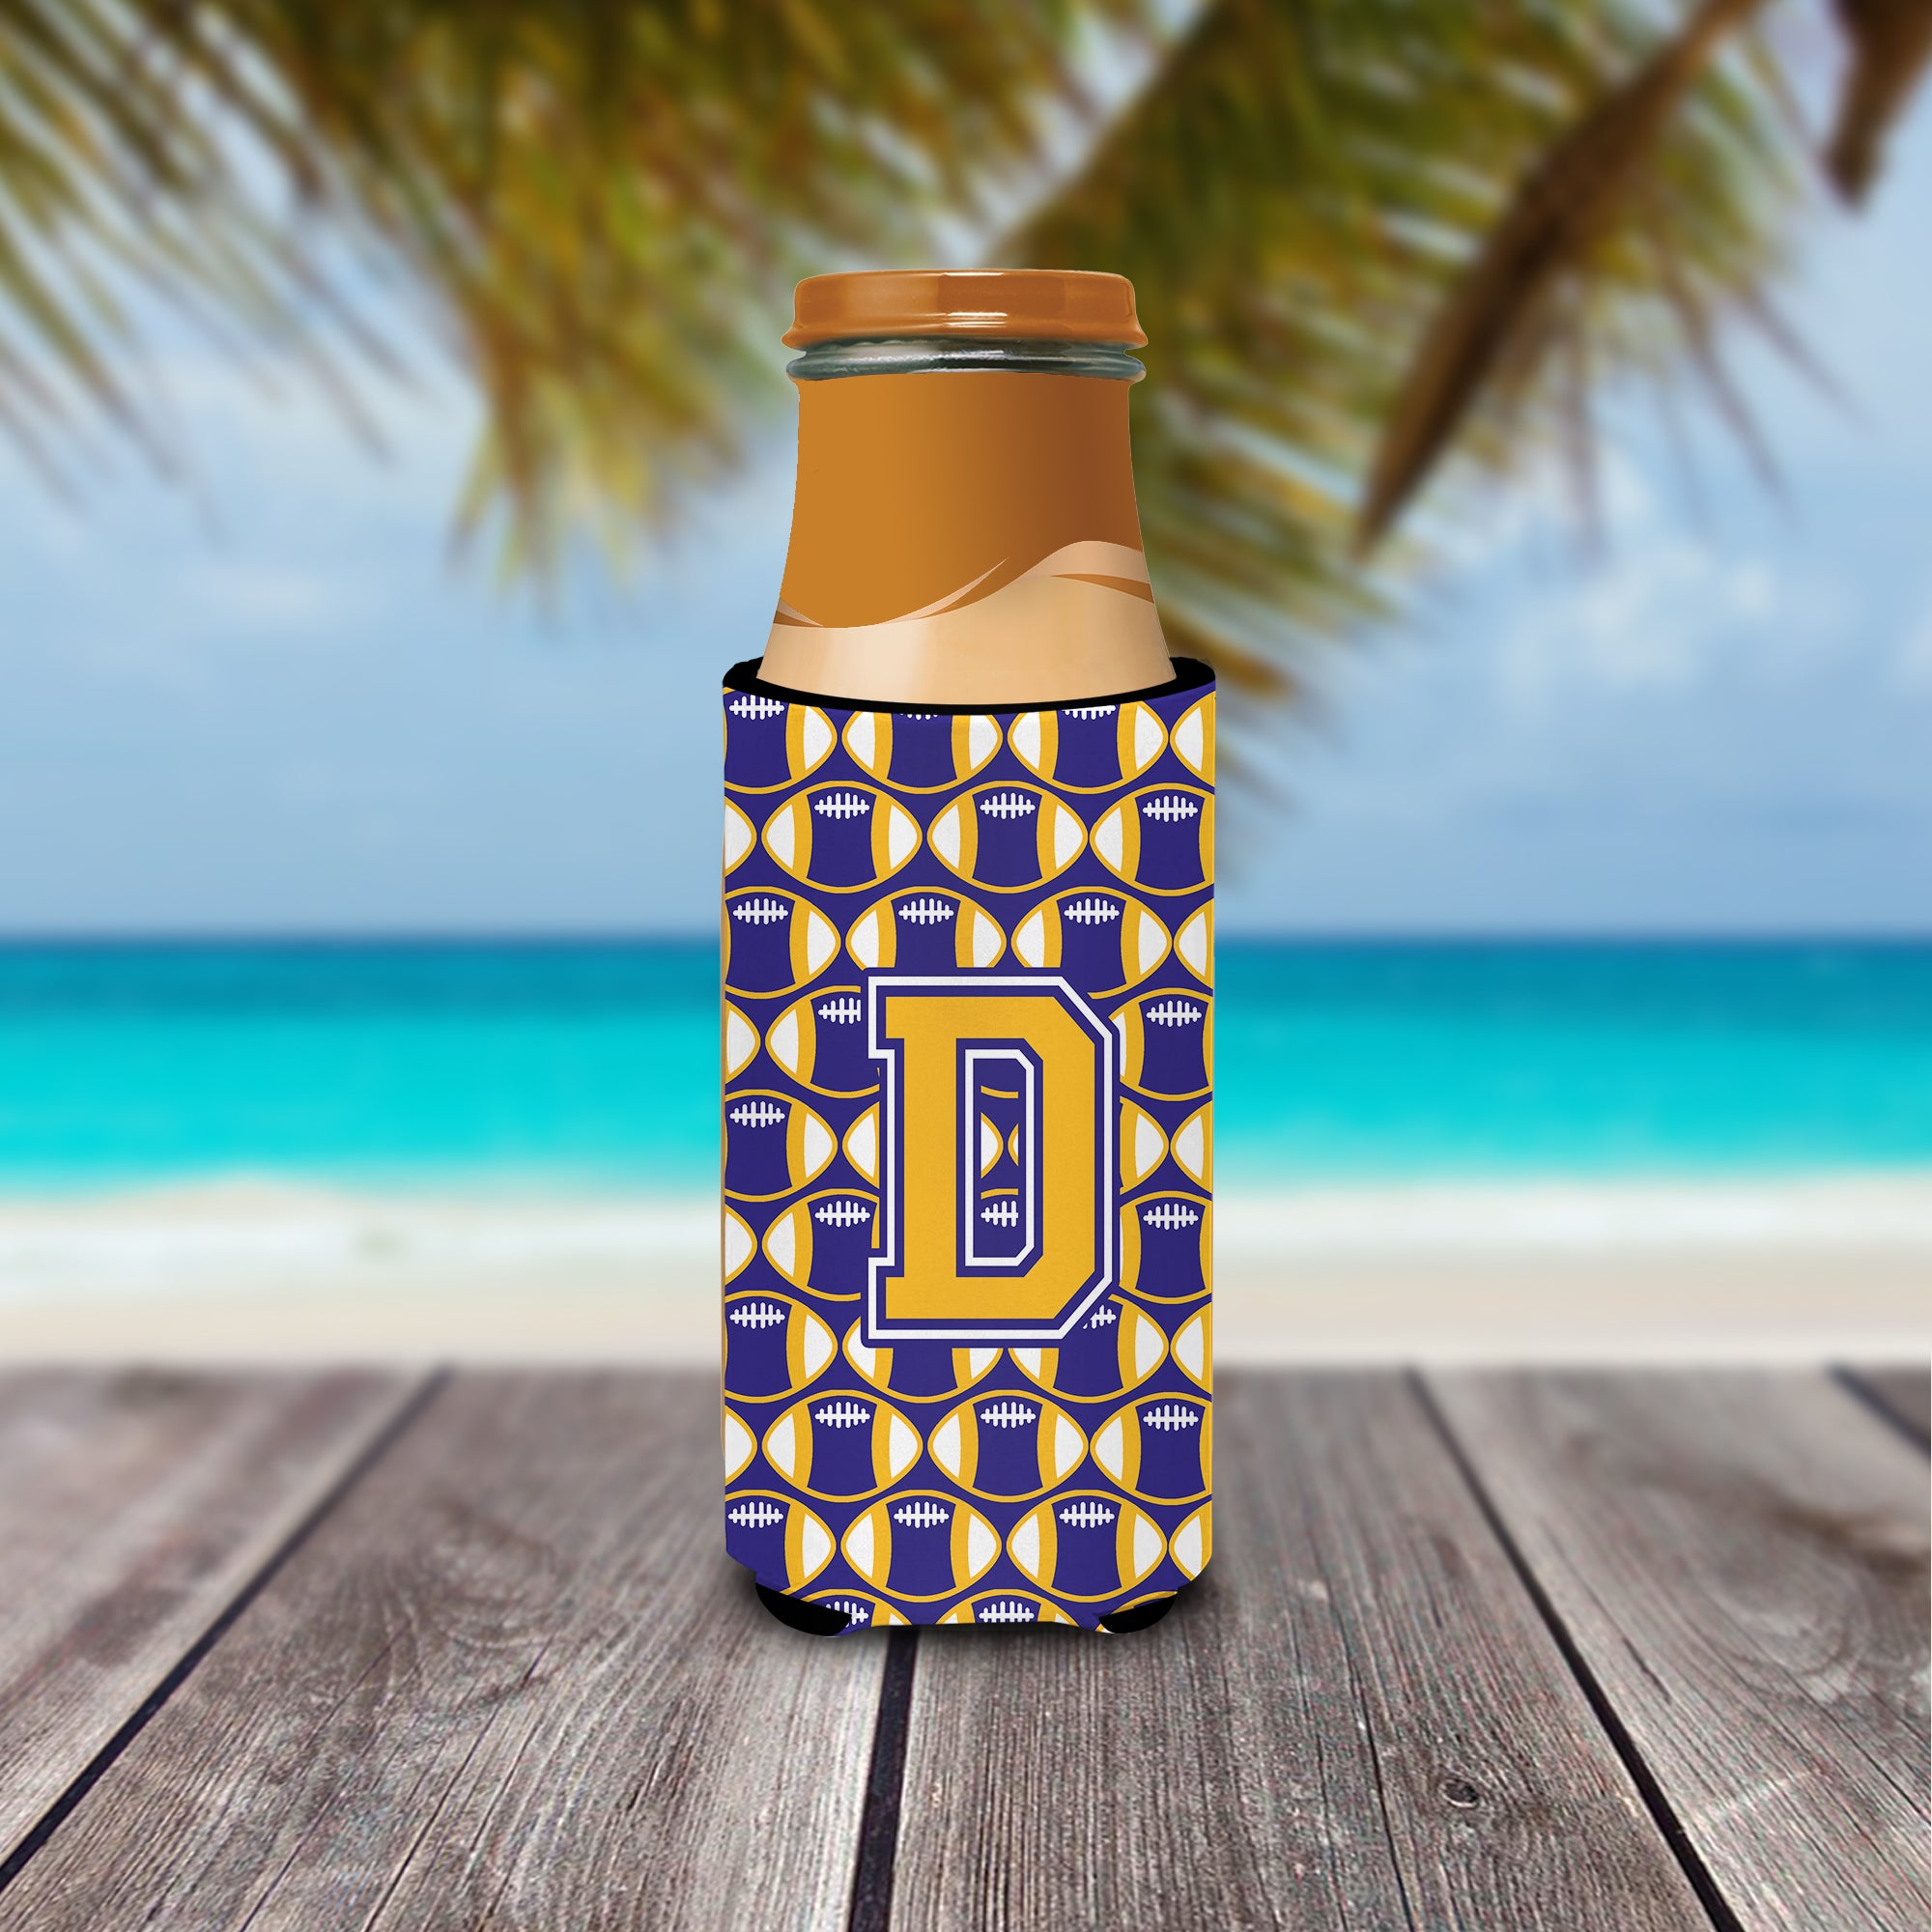 Letter D Football Purple and Gold Ultra Beverage Insulators for slim cans CJ1064-DMUK